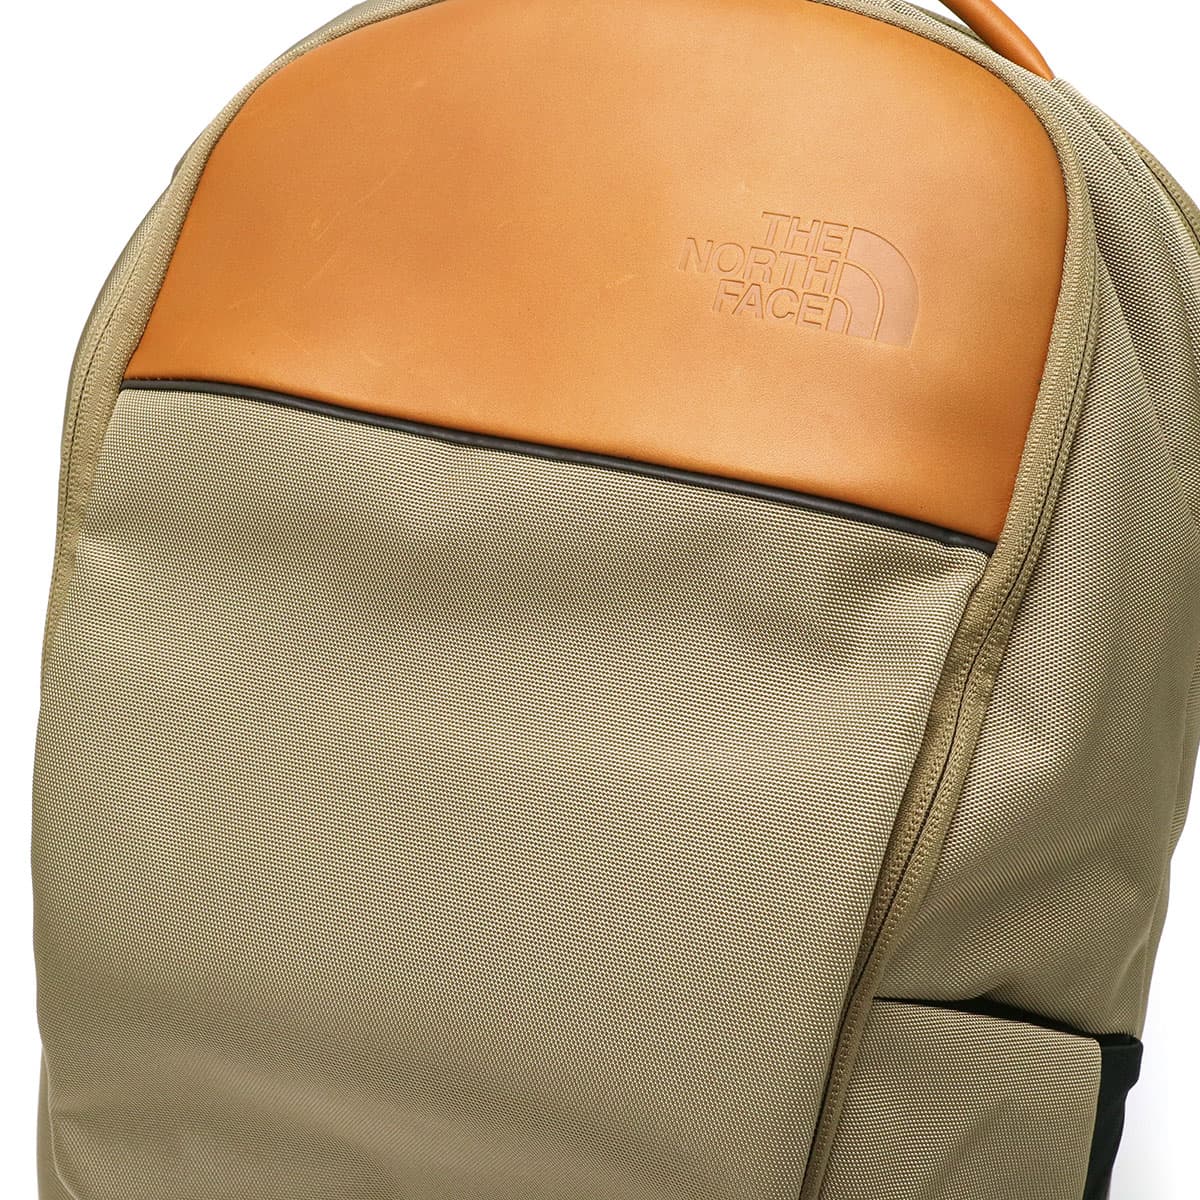 The North face / Roamer Slim Day 18L